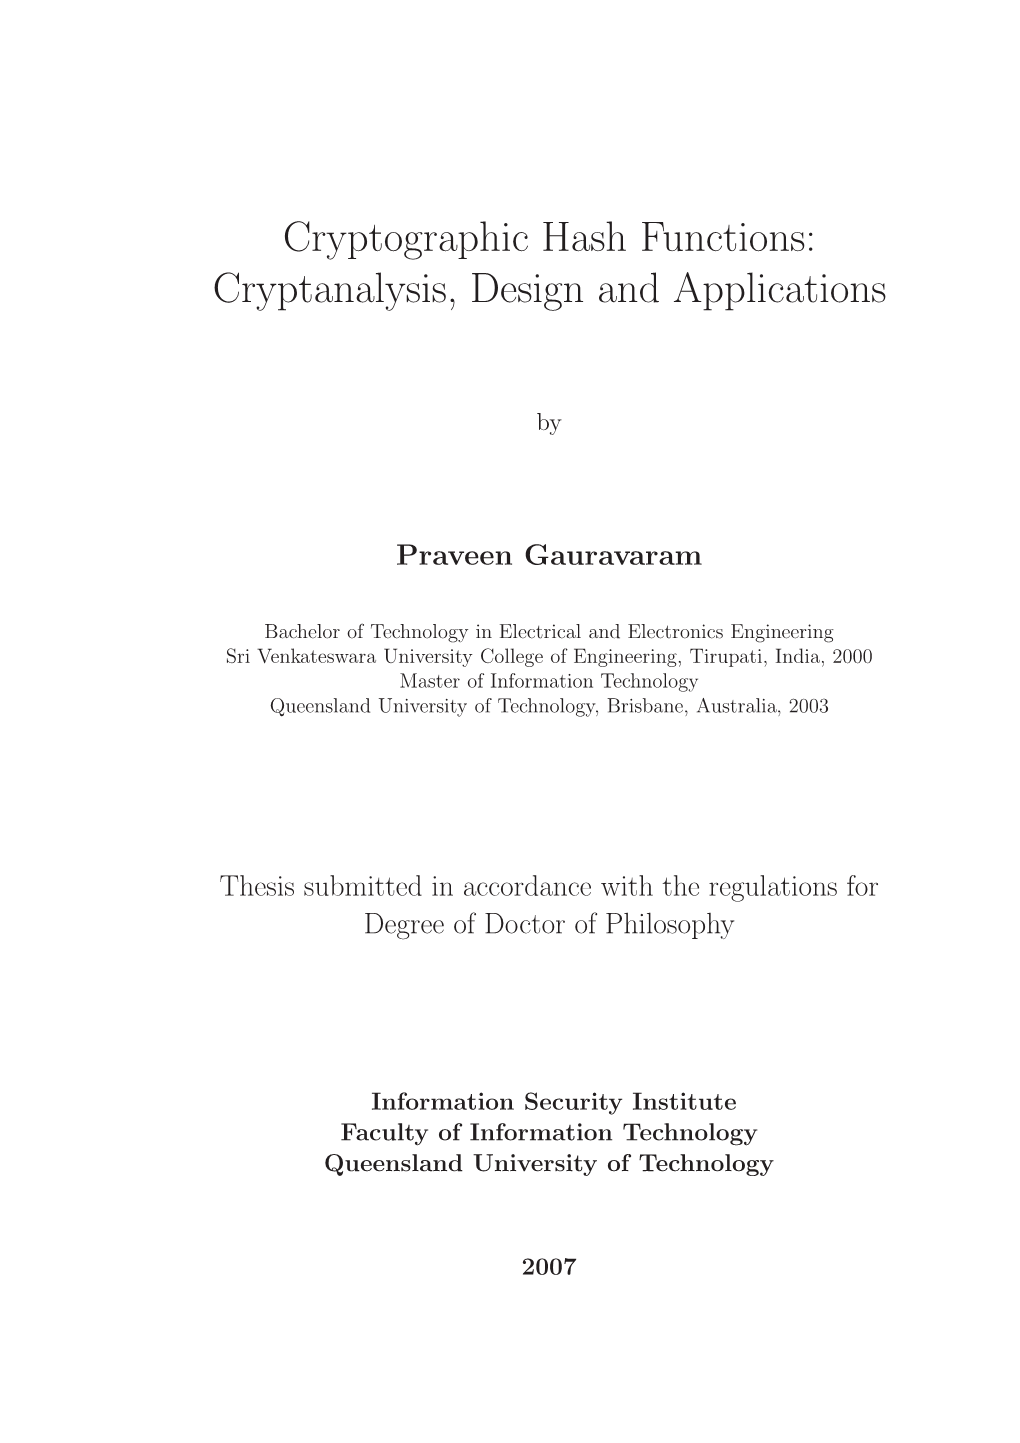 Cryptographic Hash Functions: Cryptanalysis, Design and Applications